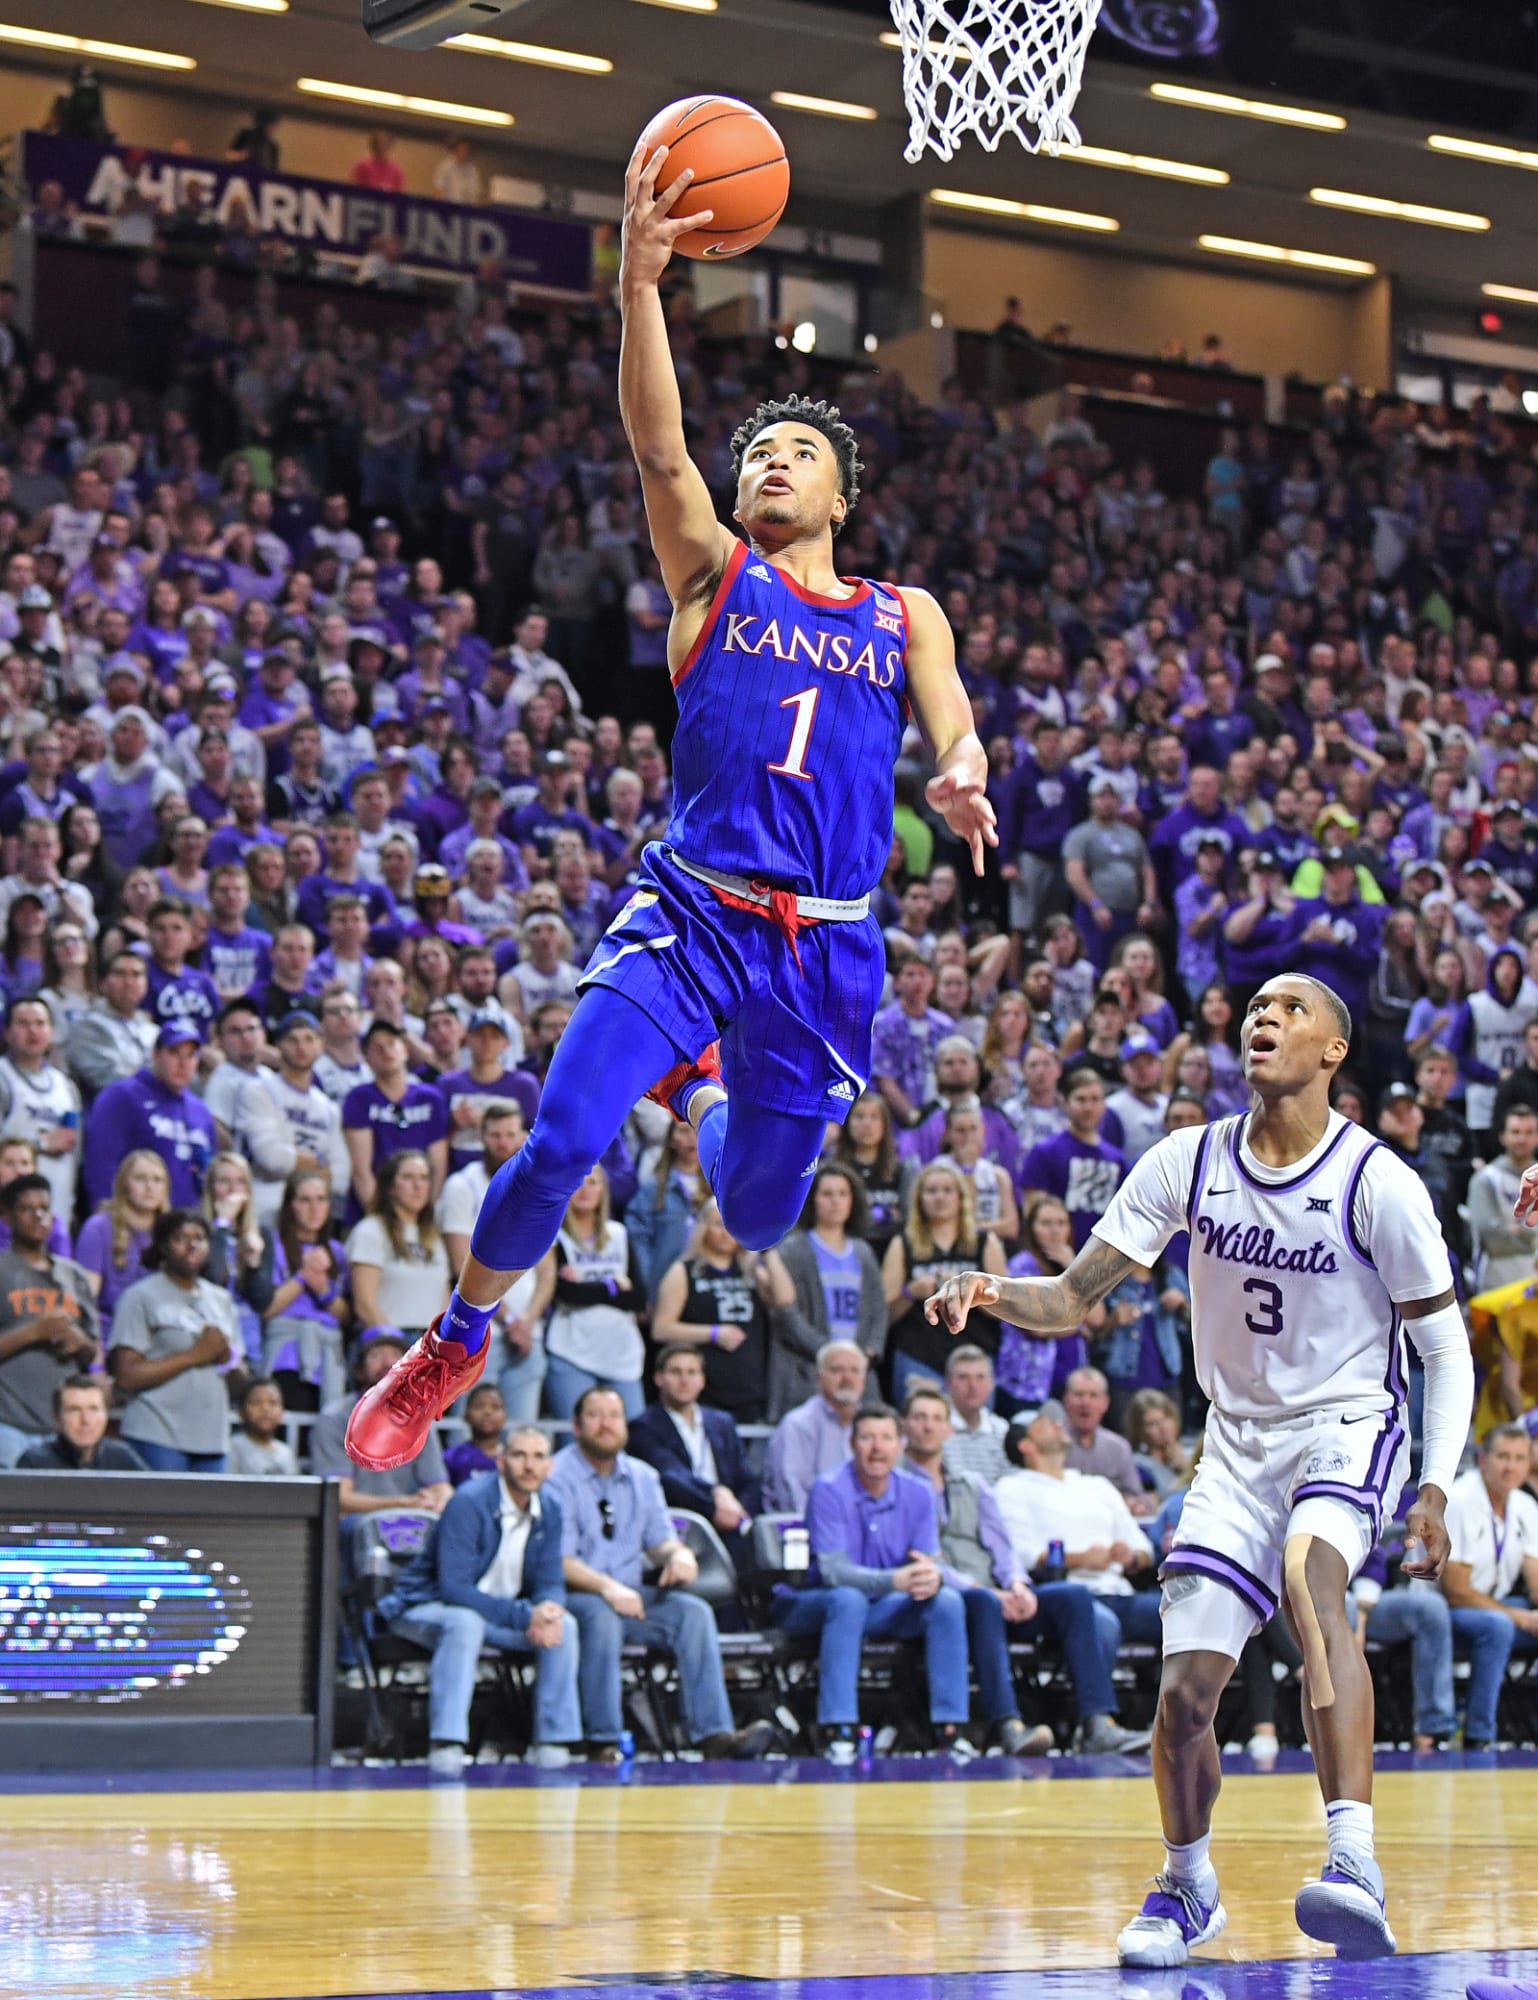 Kansas basketball: Jayhawks have another Big 12 title in their sights